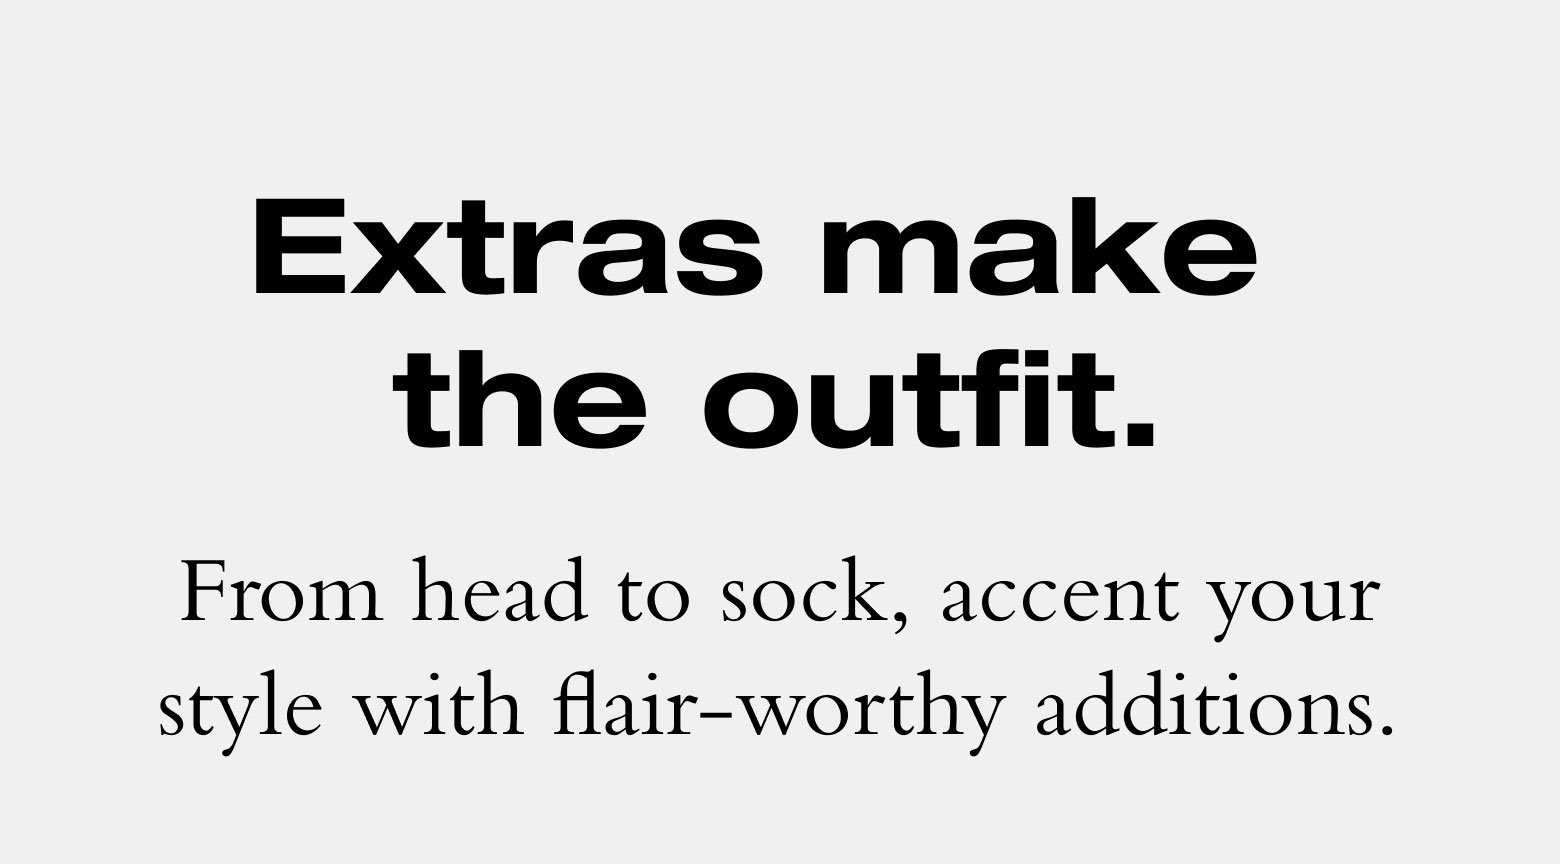 Extras make the outfit. From head to sock, accent your style with flair-worthy additions